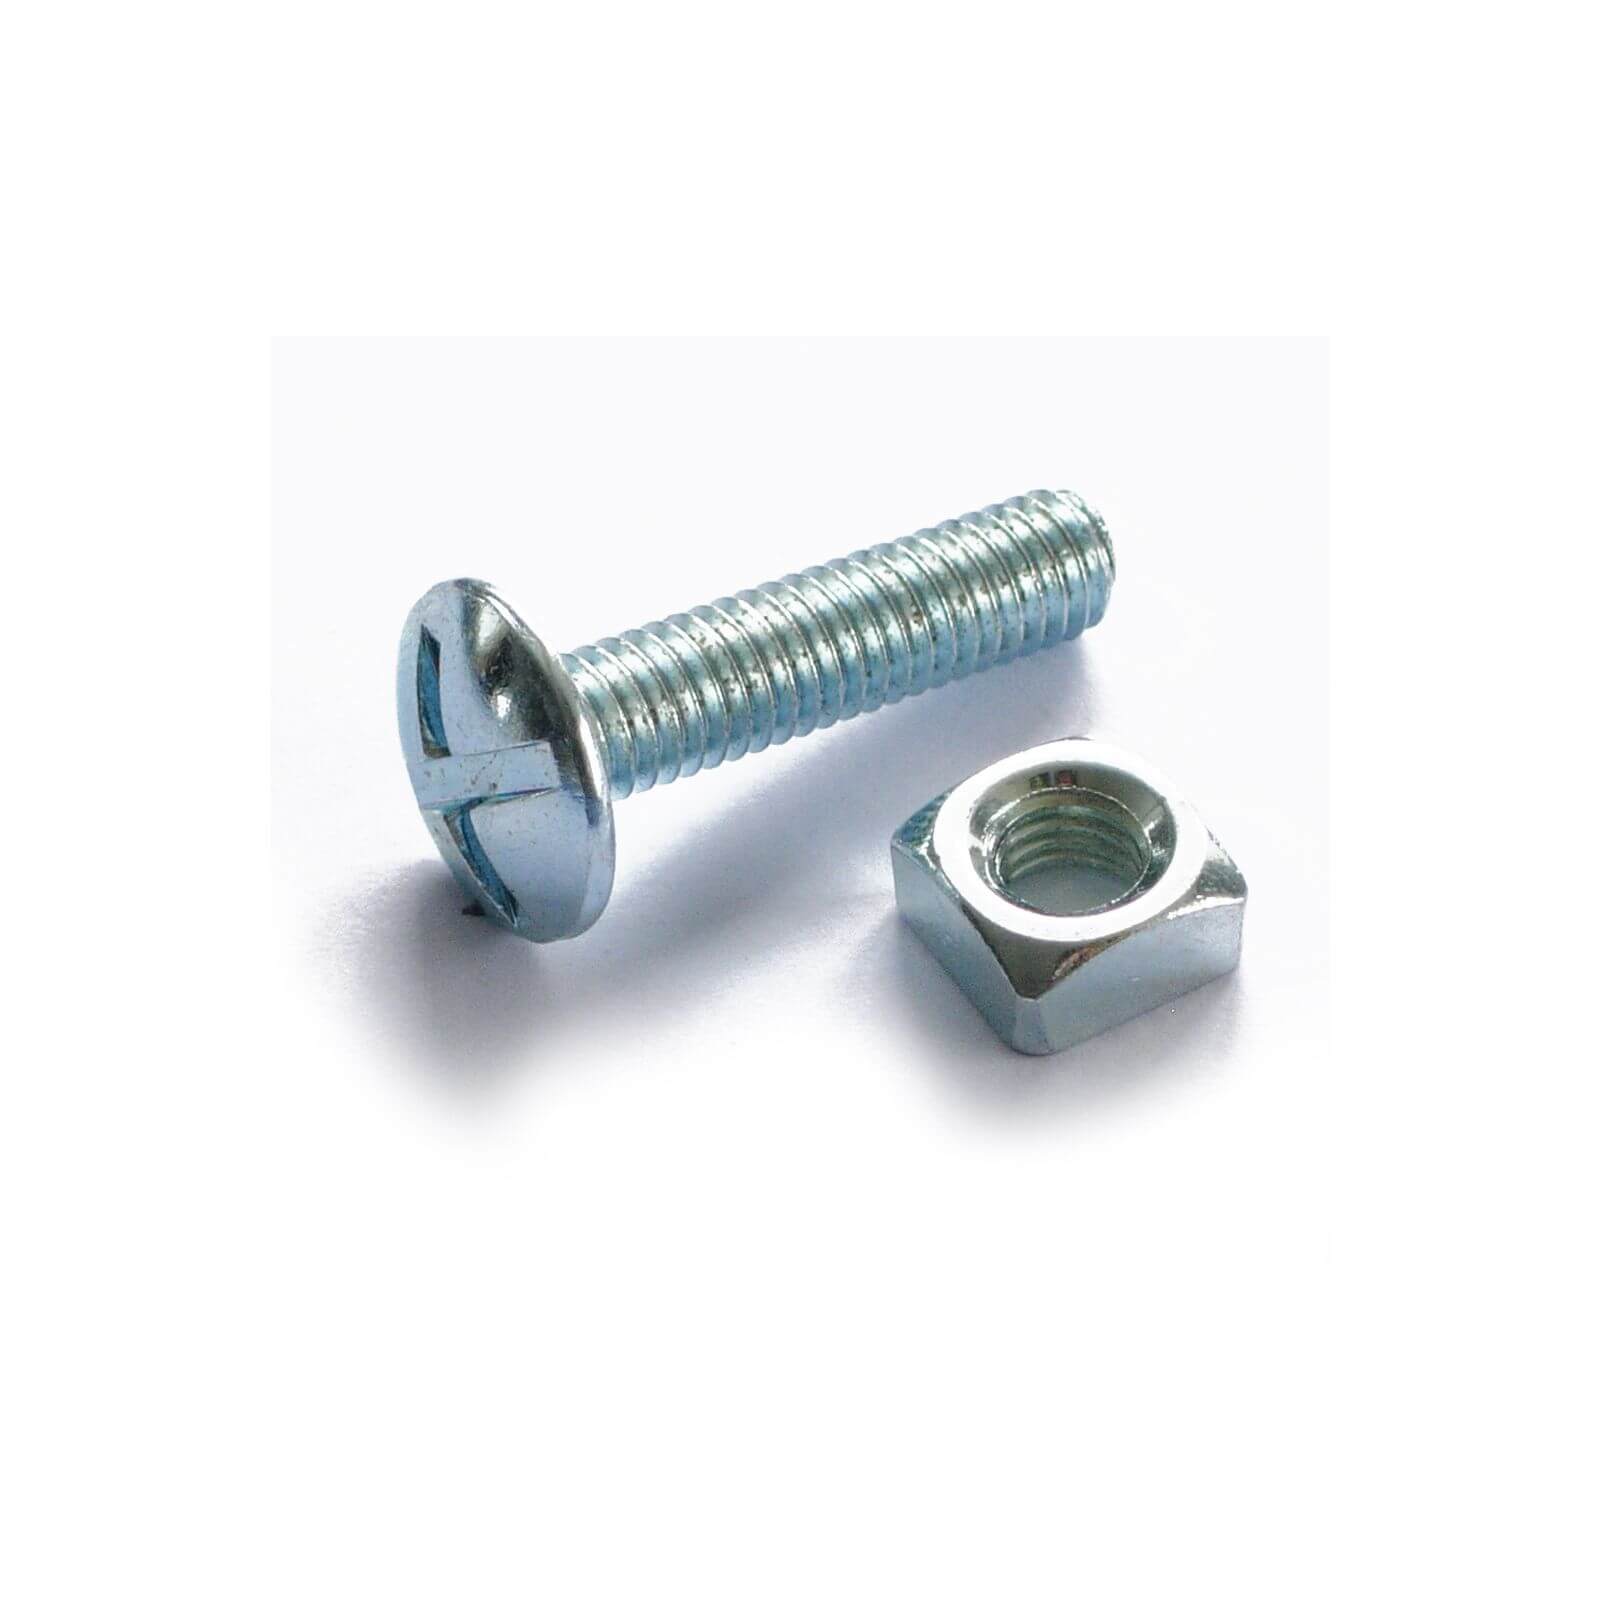 Roofing Bolt - Bright Zinc Plated - M6 60mm - 5 Pack